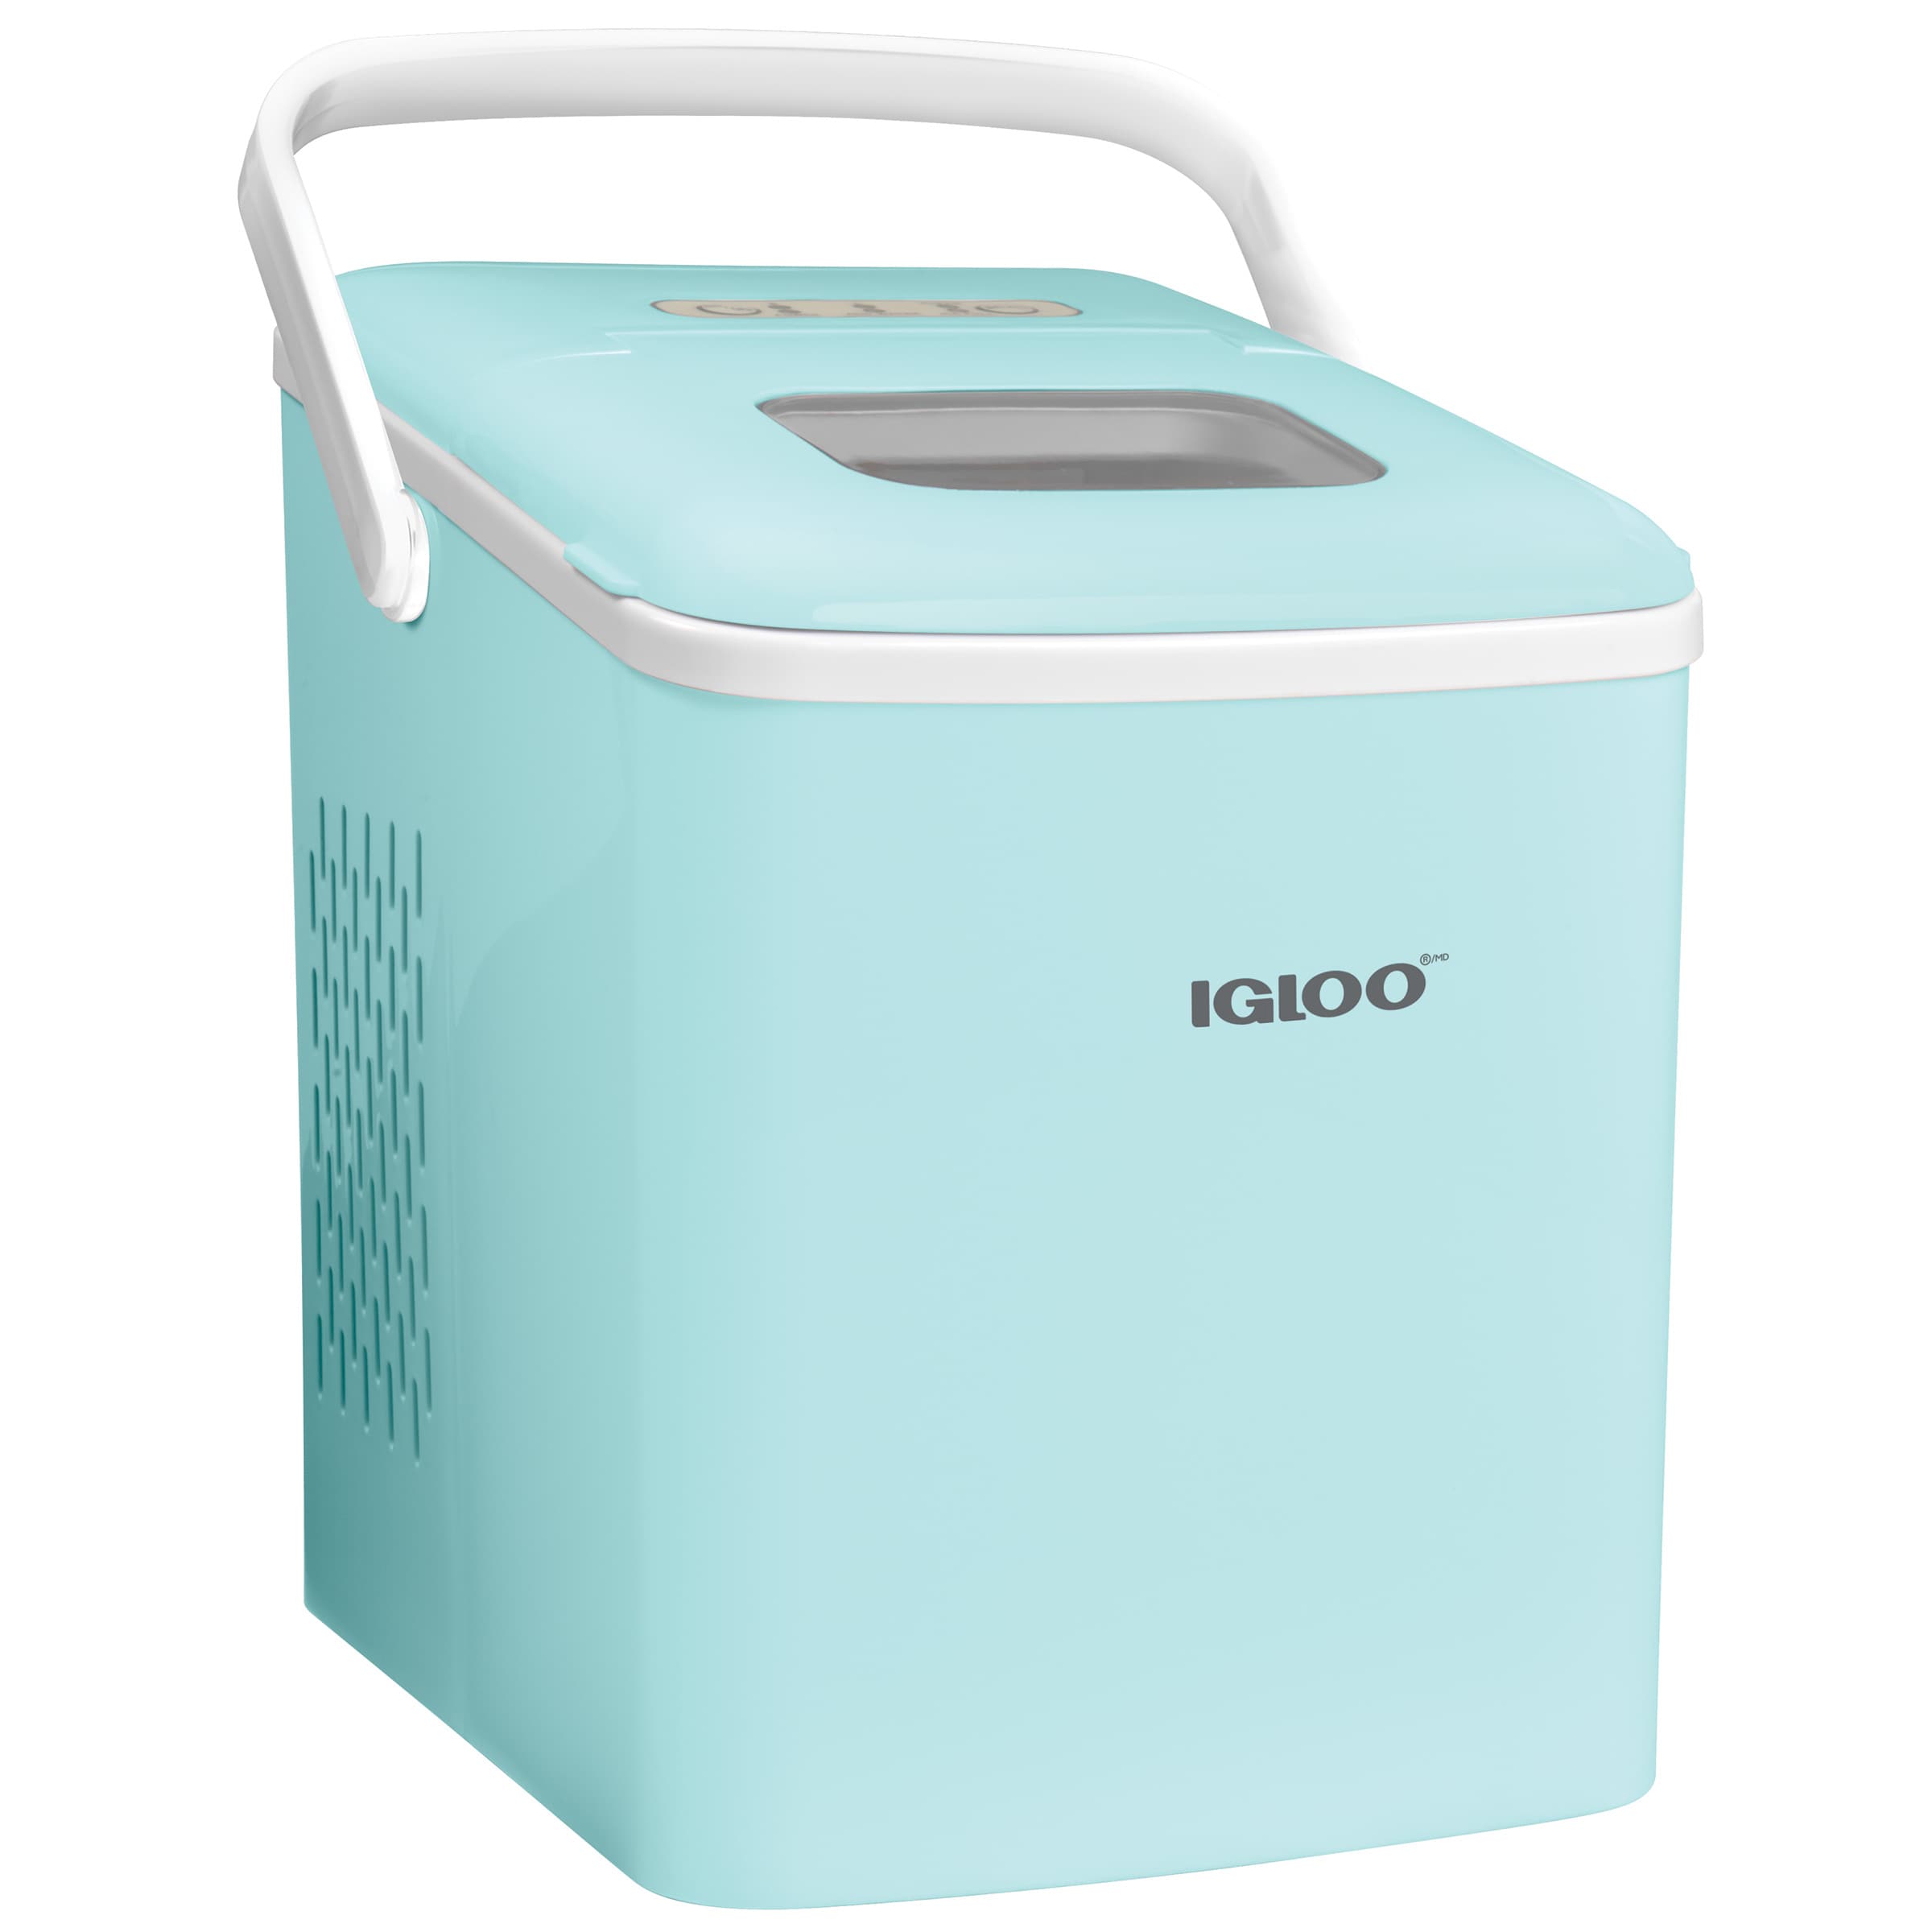 Igloo's Self-Cleaning Ice Maker makes cylindrical cubes in just '7